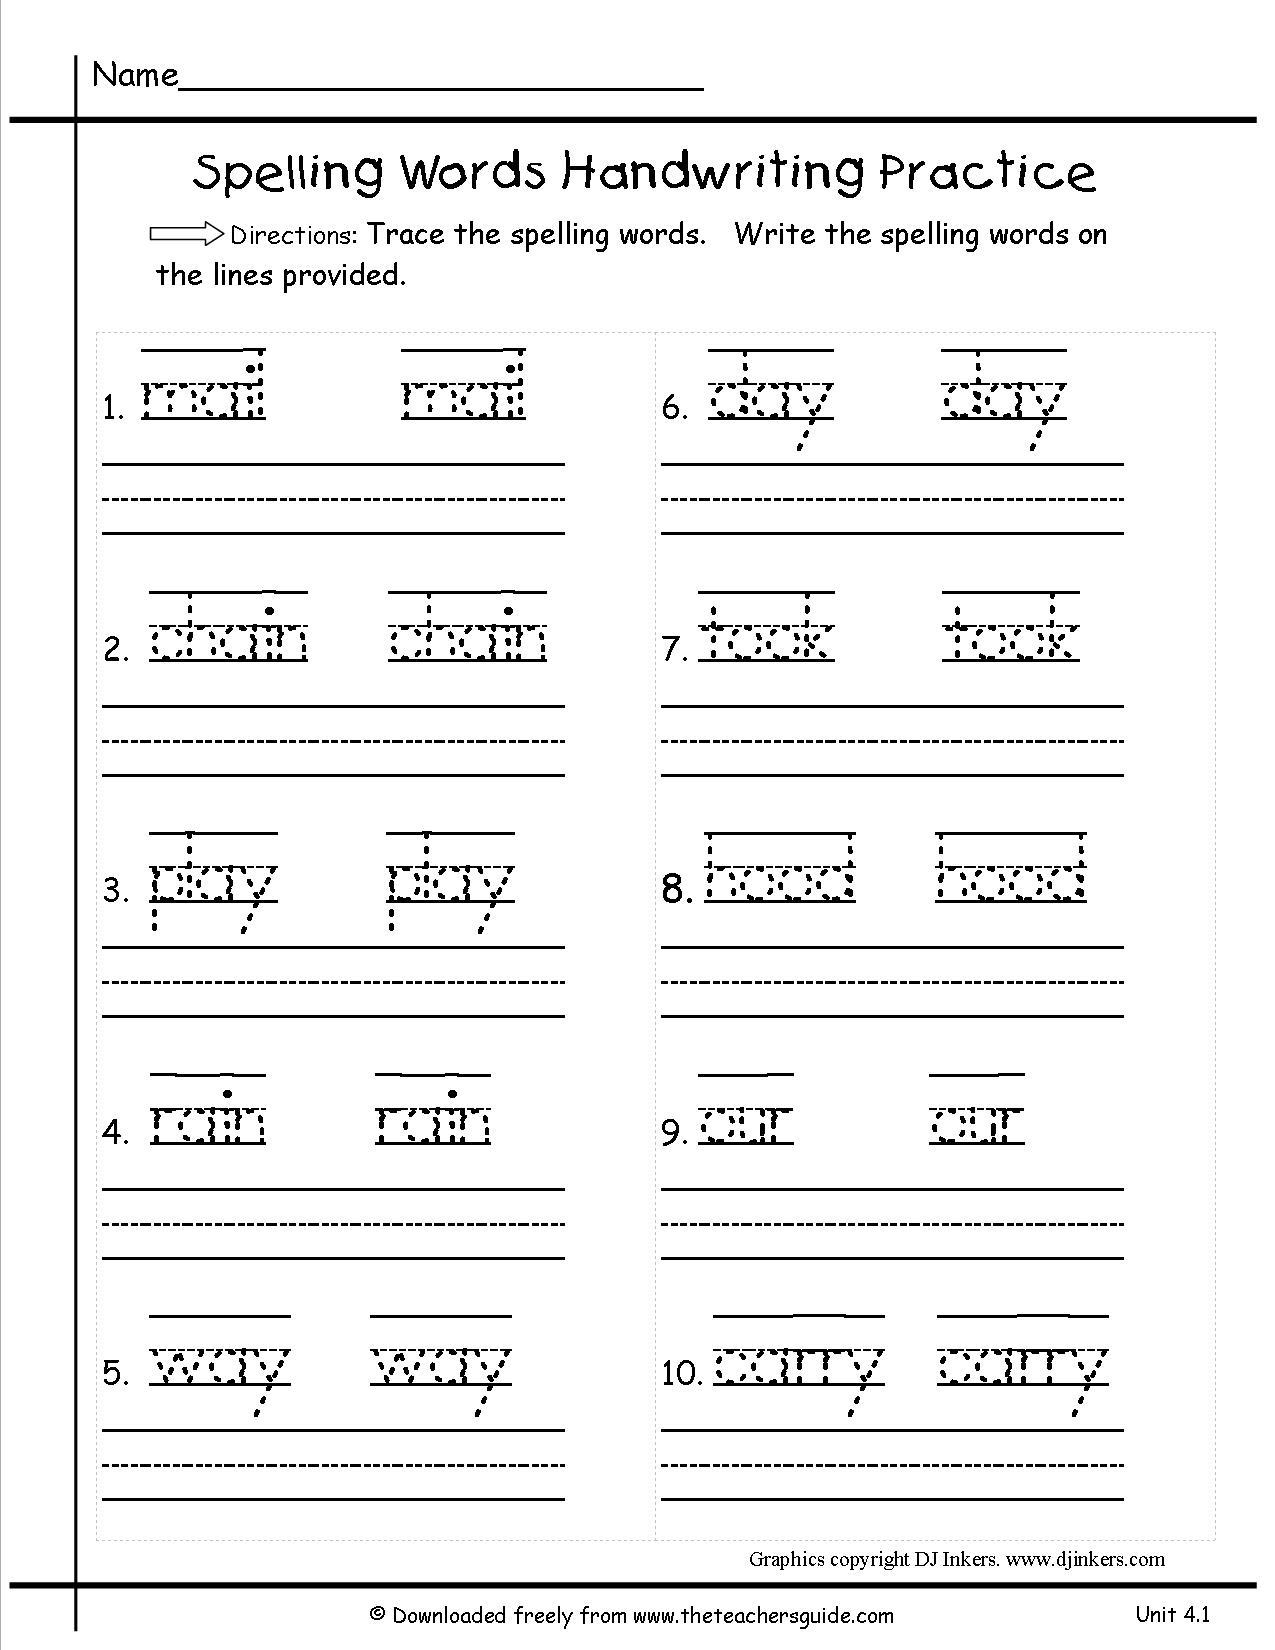 Free Printable Language Arts Worksheets For 1St Grade Lexia s Blog